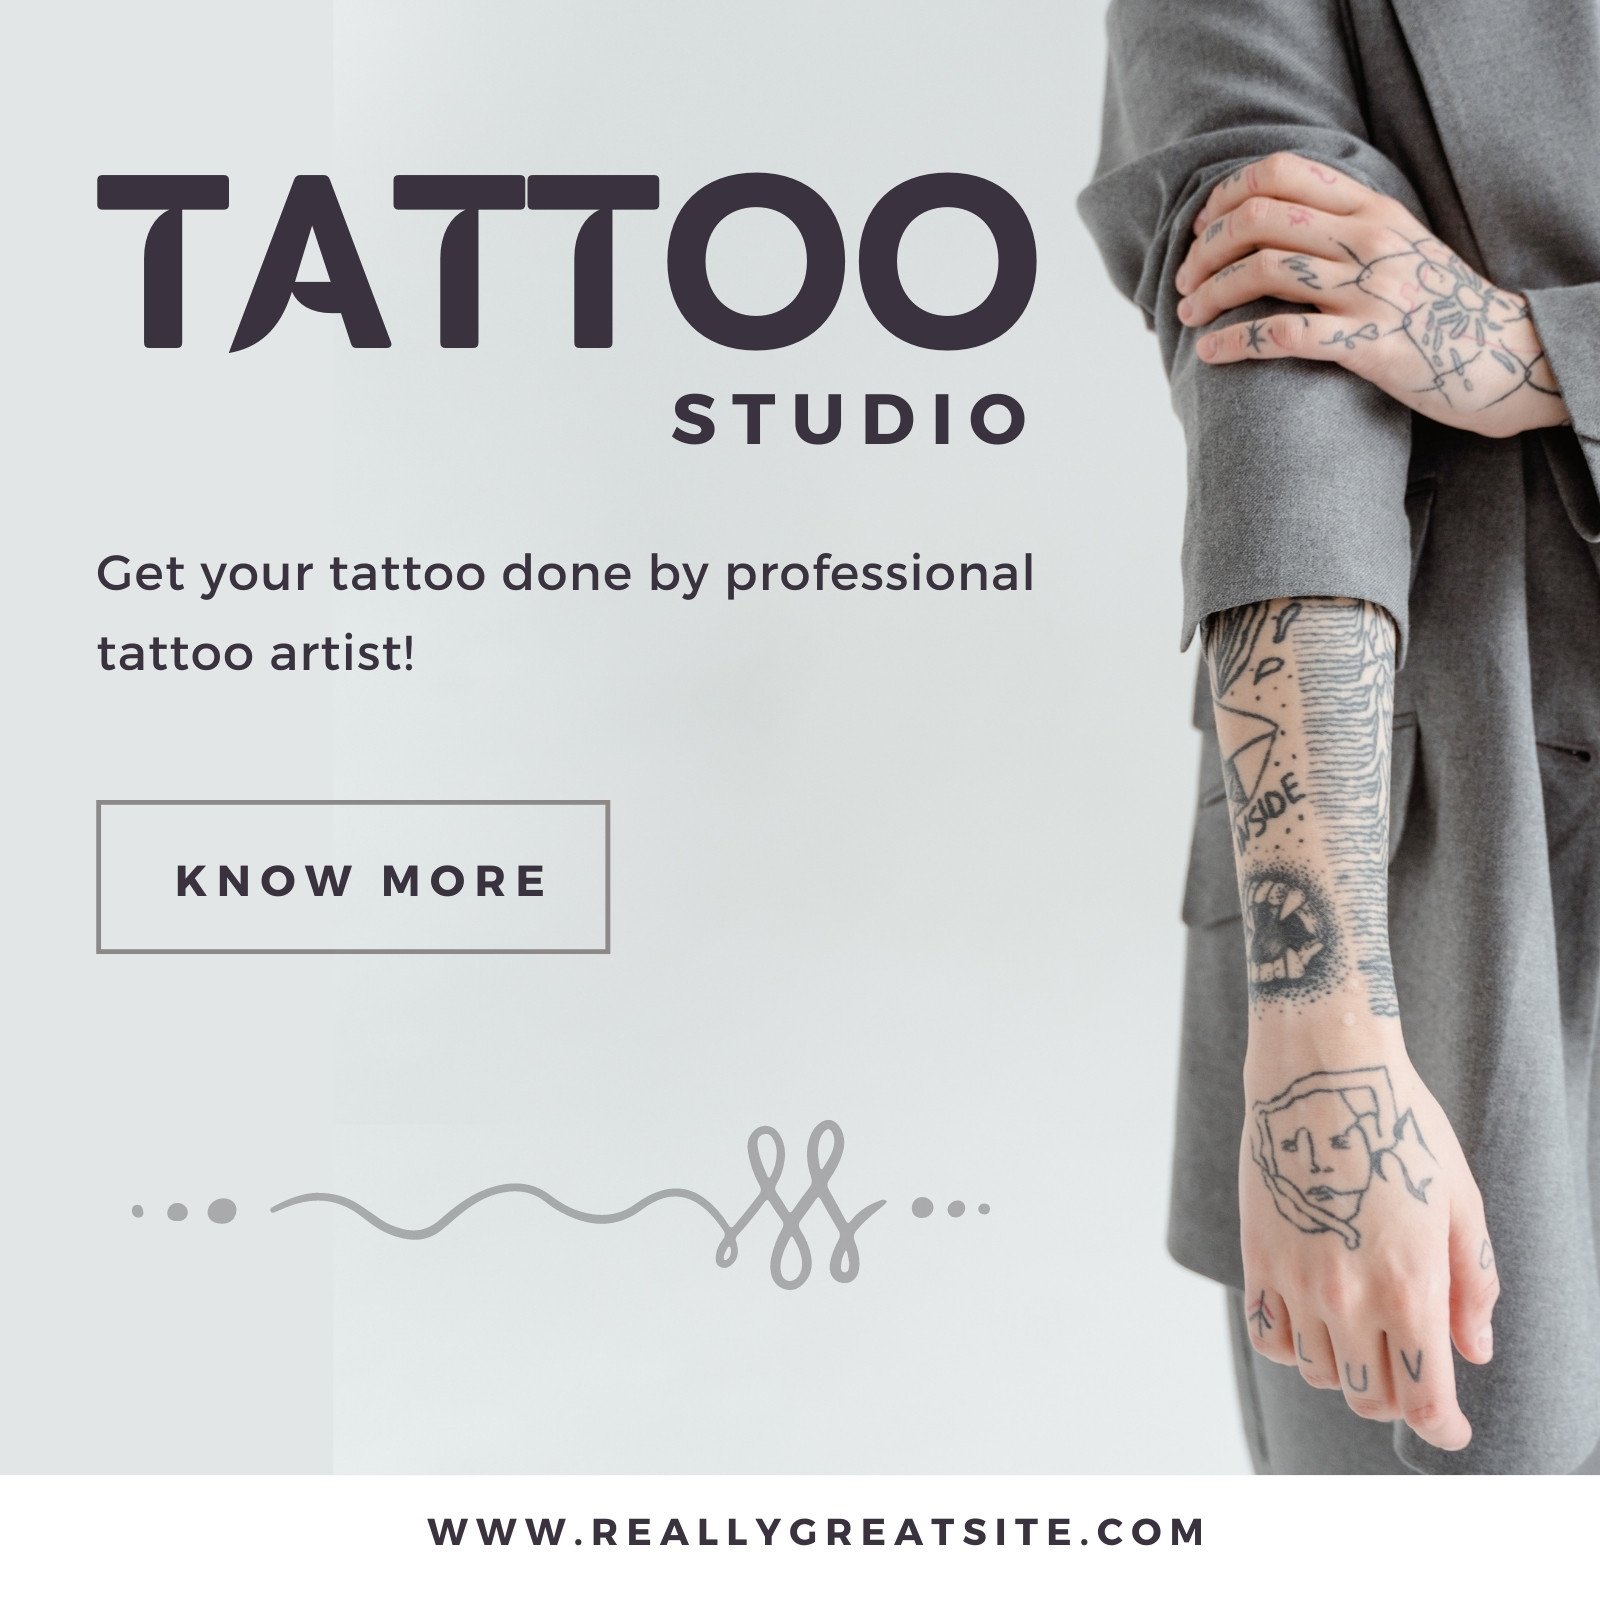 A Tattoo Artist's Guide to Instagram: How to Promote Your Tattoo Business |  Painful Pleasures Community